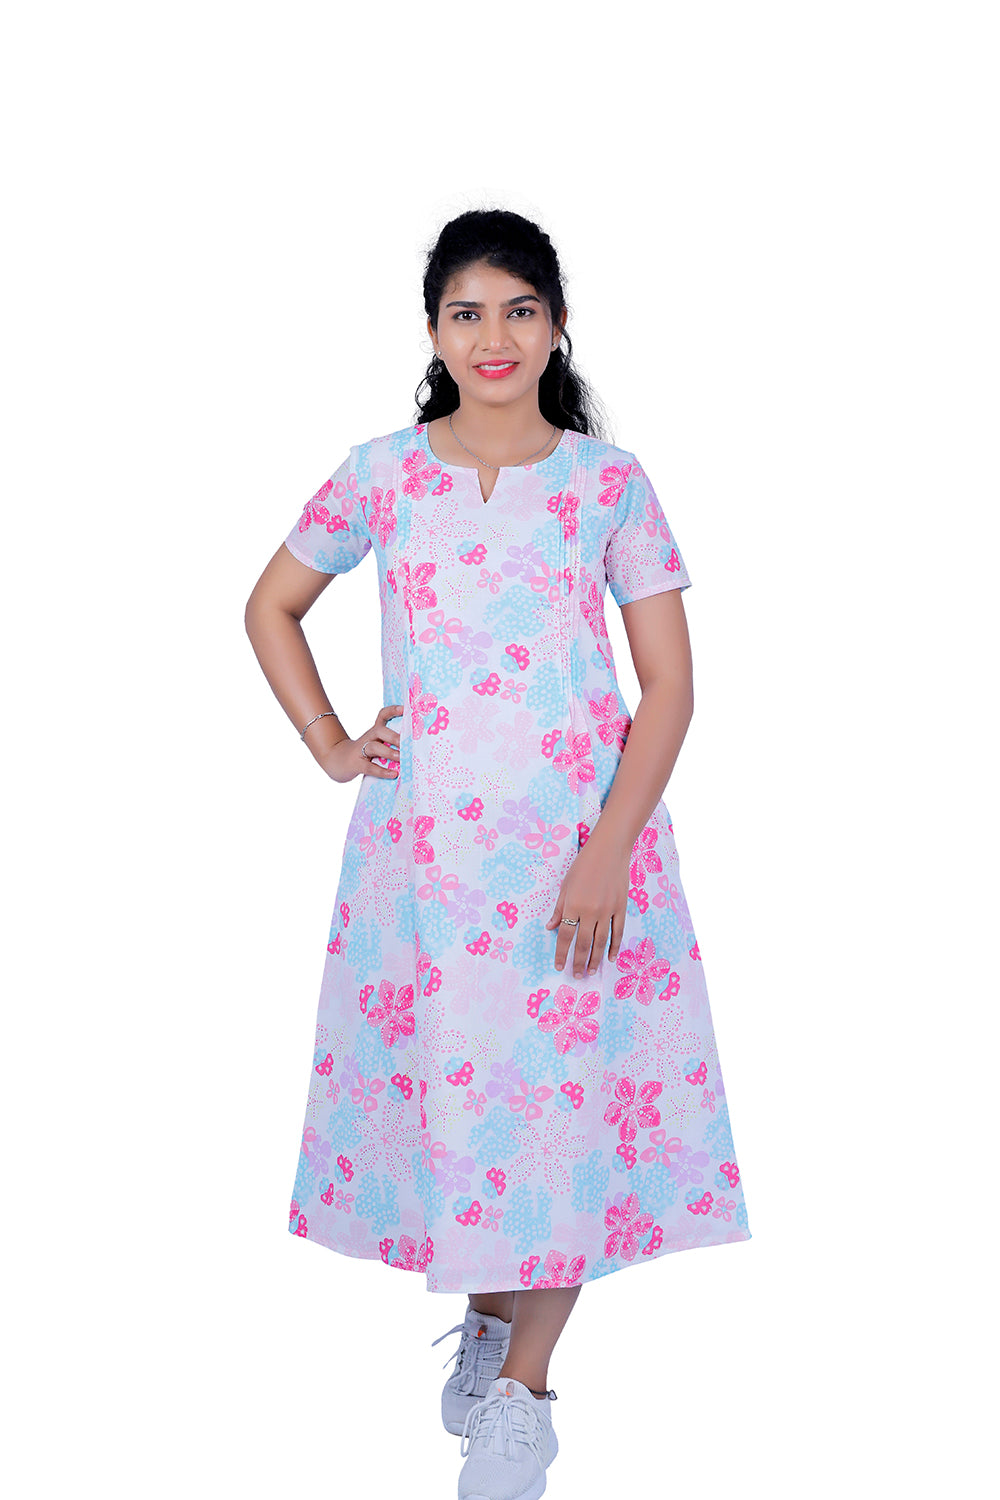 Womens Cotton White with Pink Floral Print A Line Kurti | S3X141